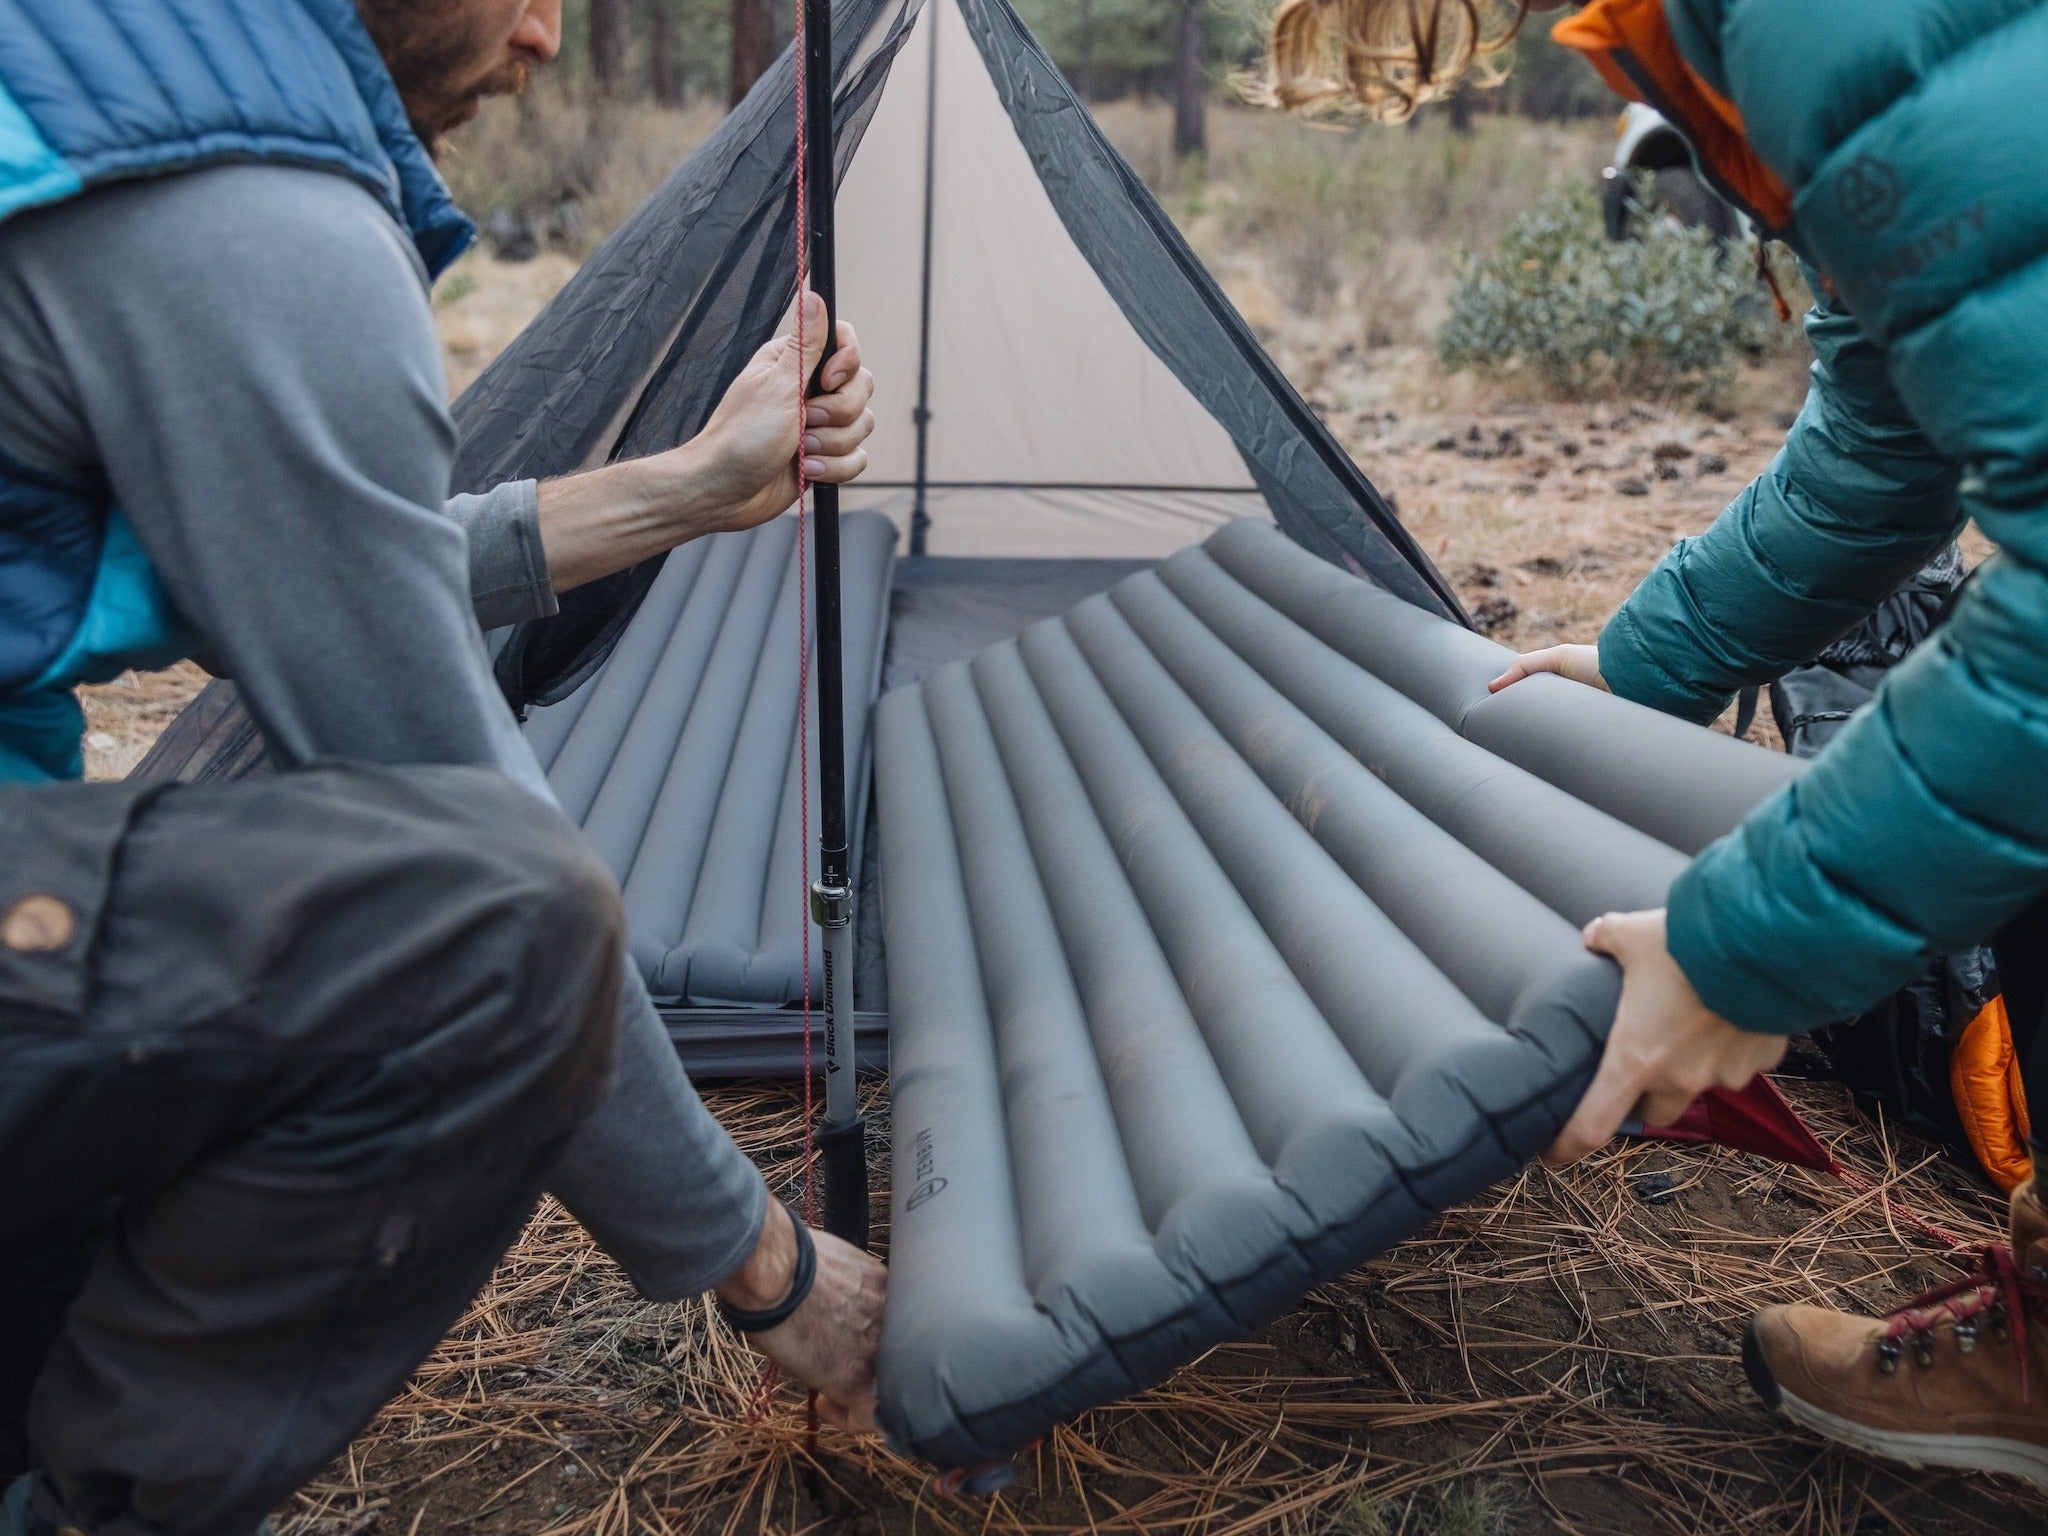 I Washed my Zenbivy for the First Time: Here's What I Learned